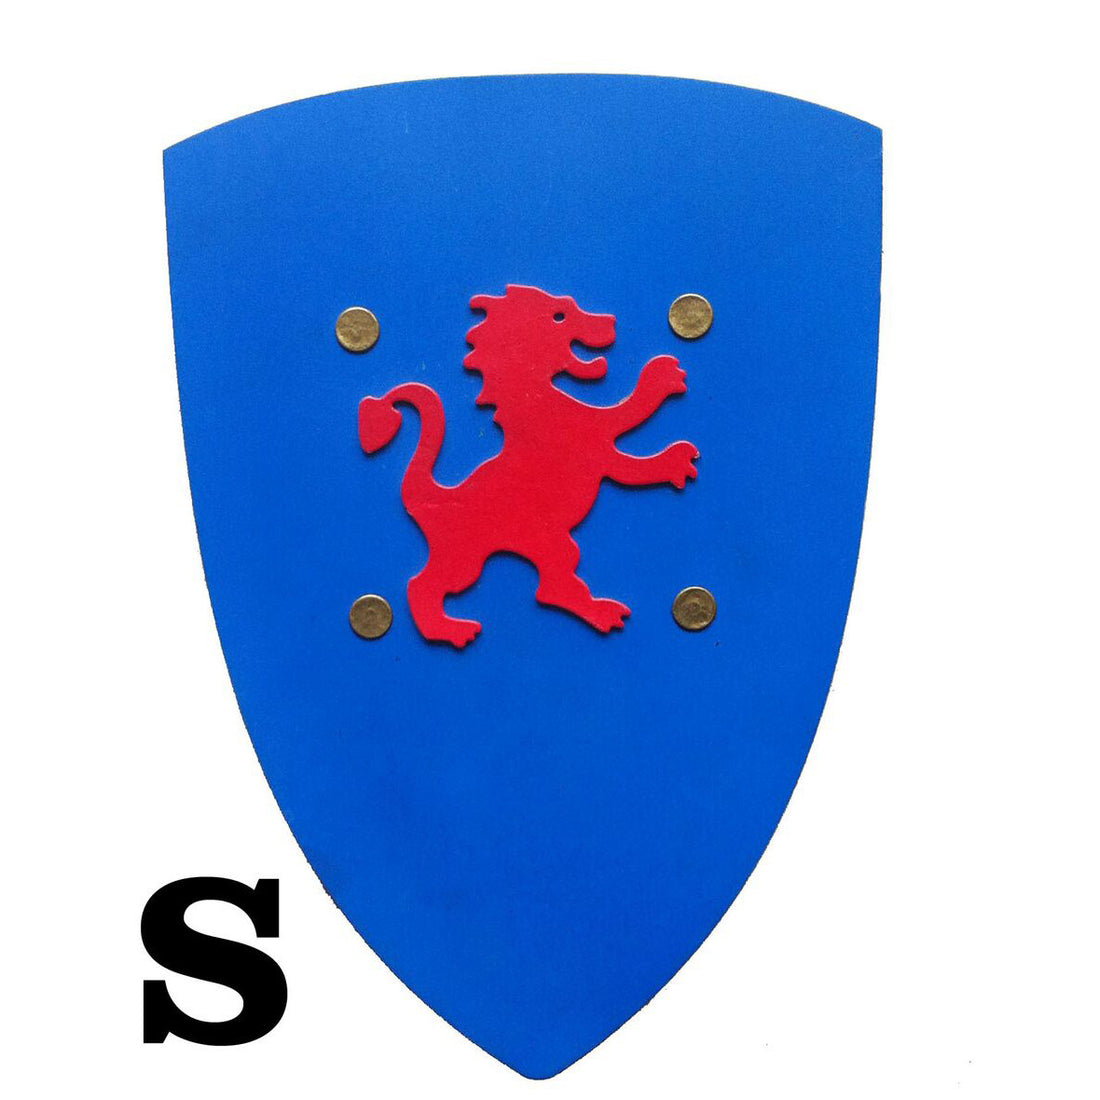 kàlid-medieval-shield-kamelot-small-with-relief-motif-blue-01